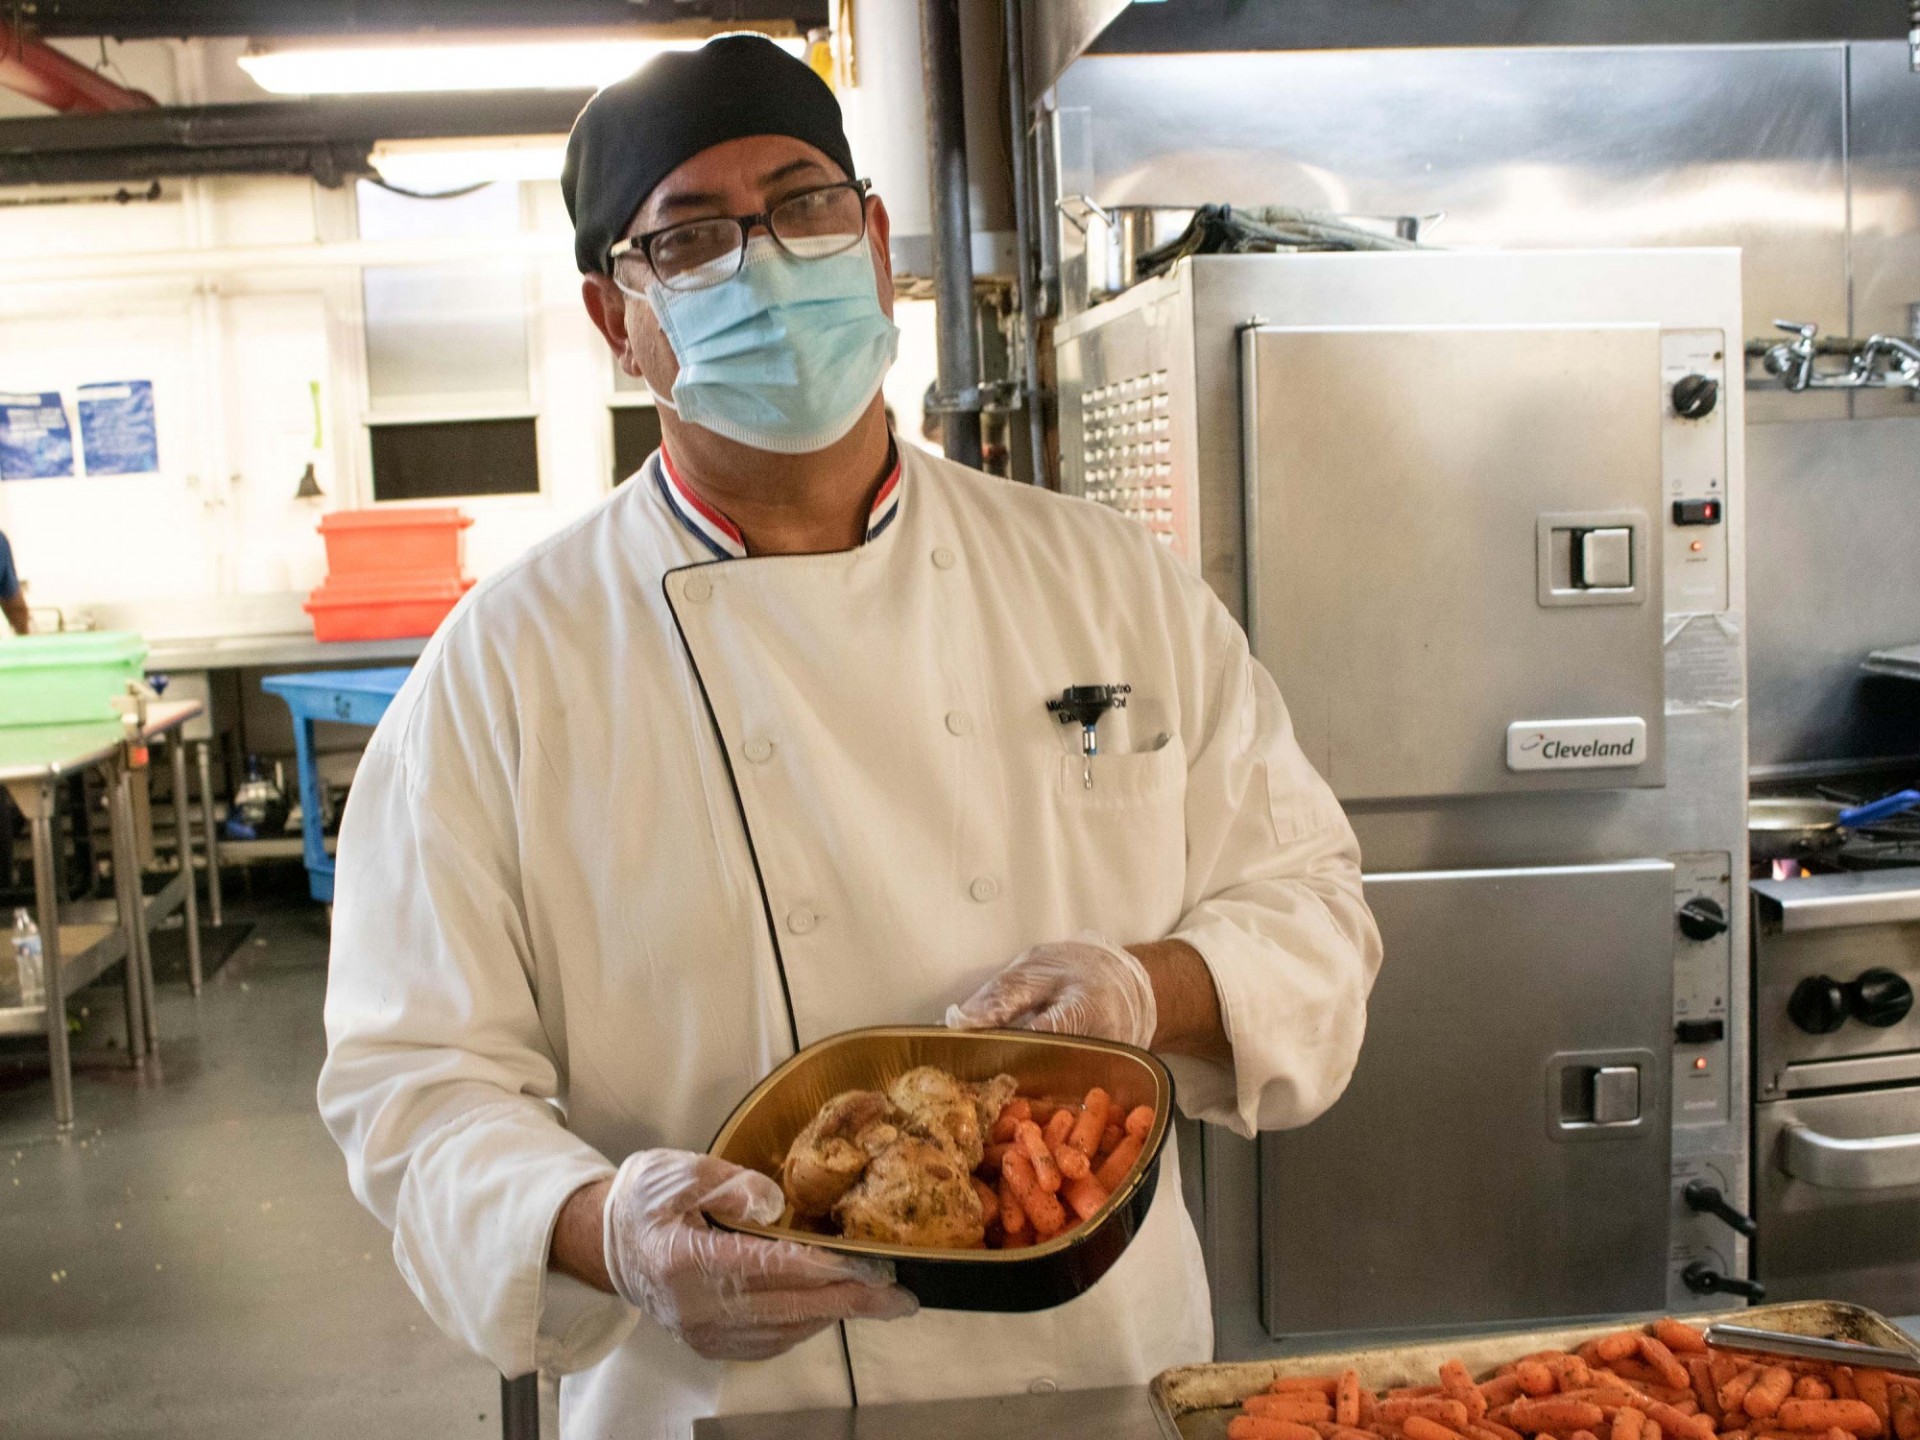 Chef Mike standing the kitchen holding a to-go box of roasted chicken and carrots.